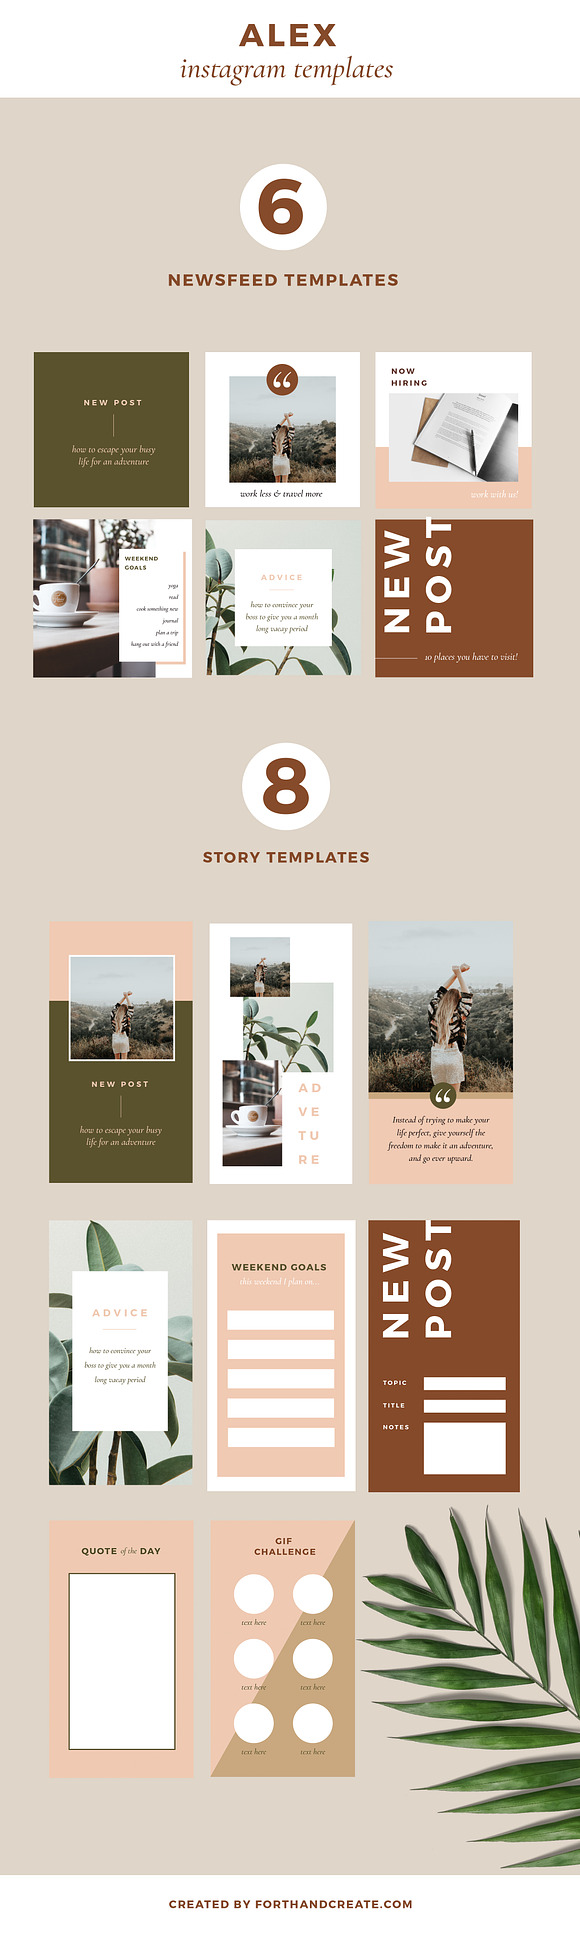 Alex Instagram Templates in Instagram Templates - product preview 1